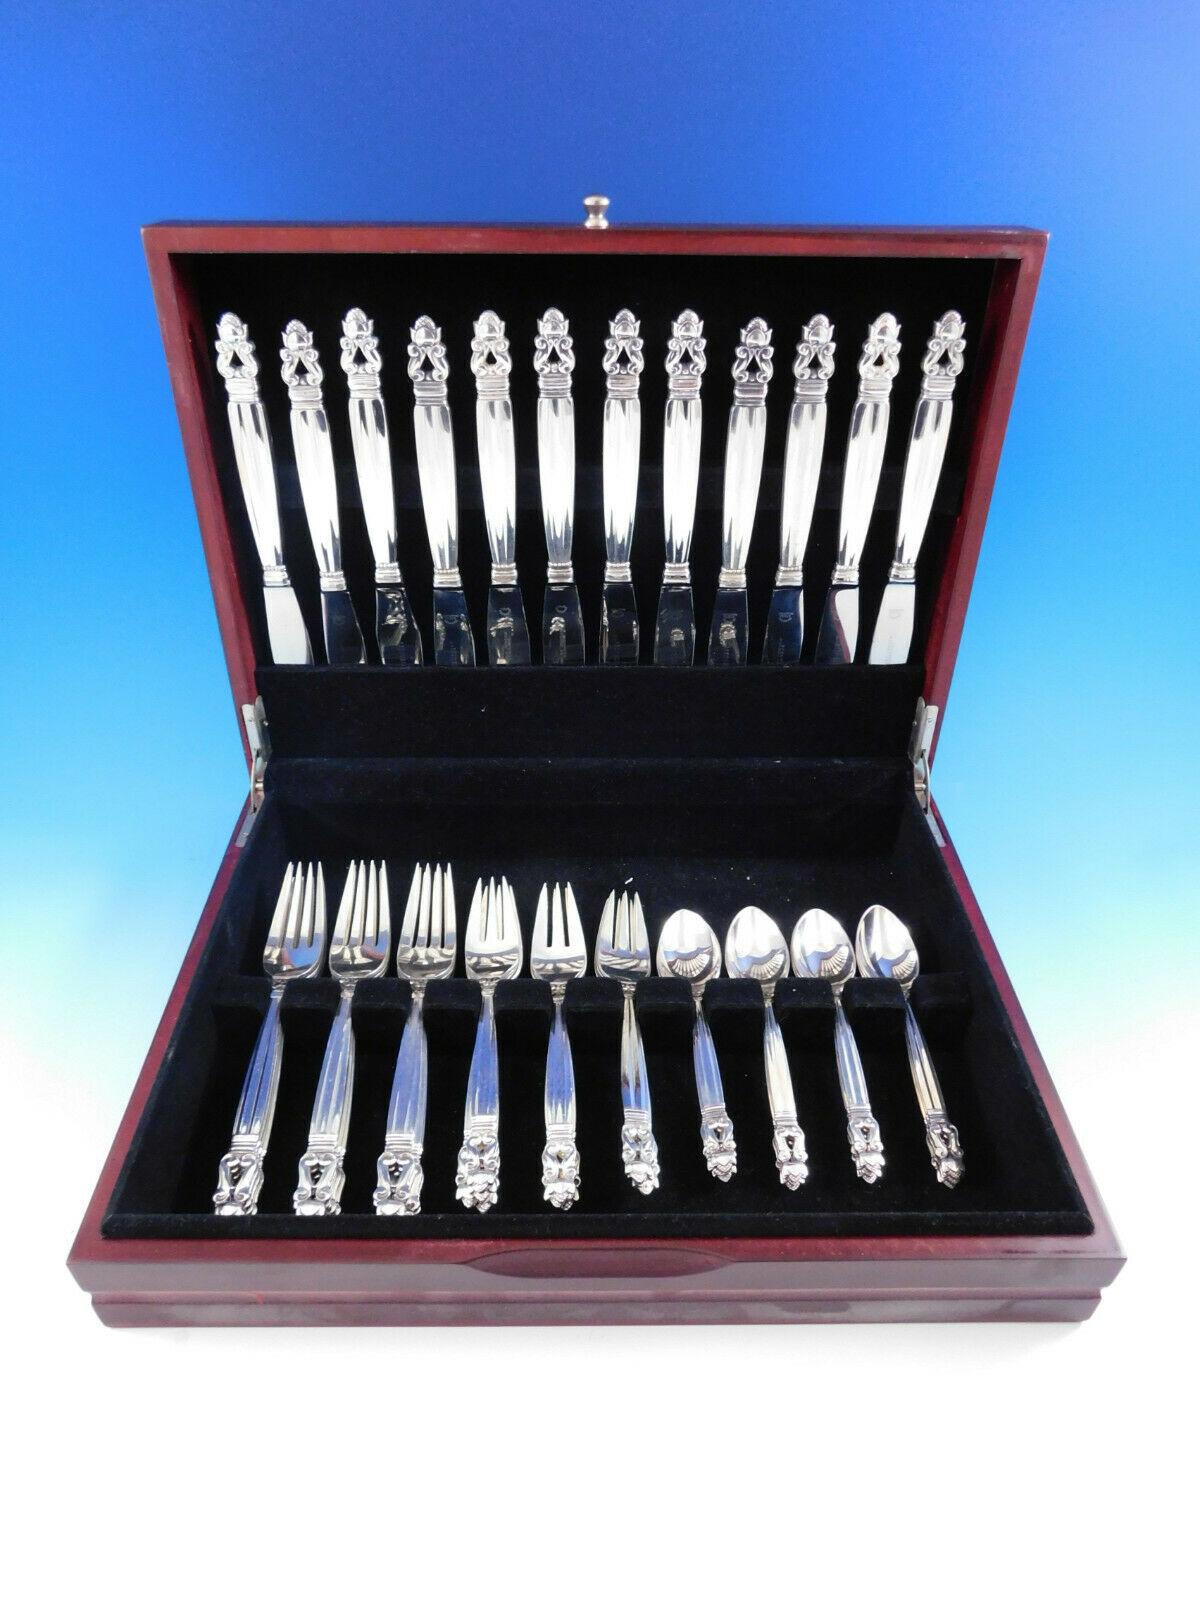 Acorn by Georg Jensen sterling silver dinner size flatware set, 48 pieces. This set includes:

12 dinner knives, long handle, 9